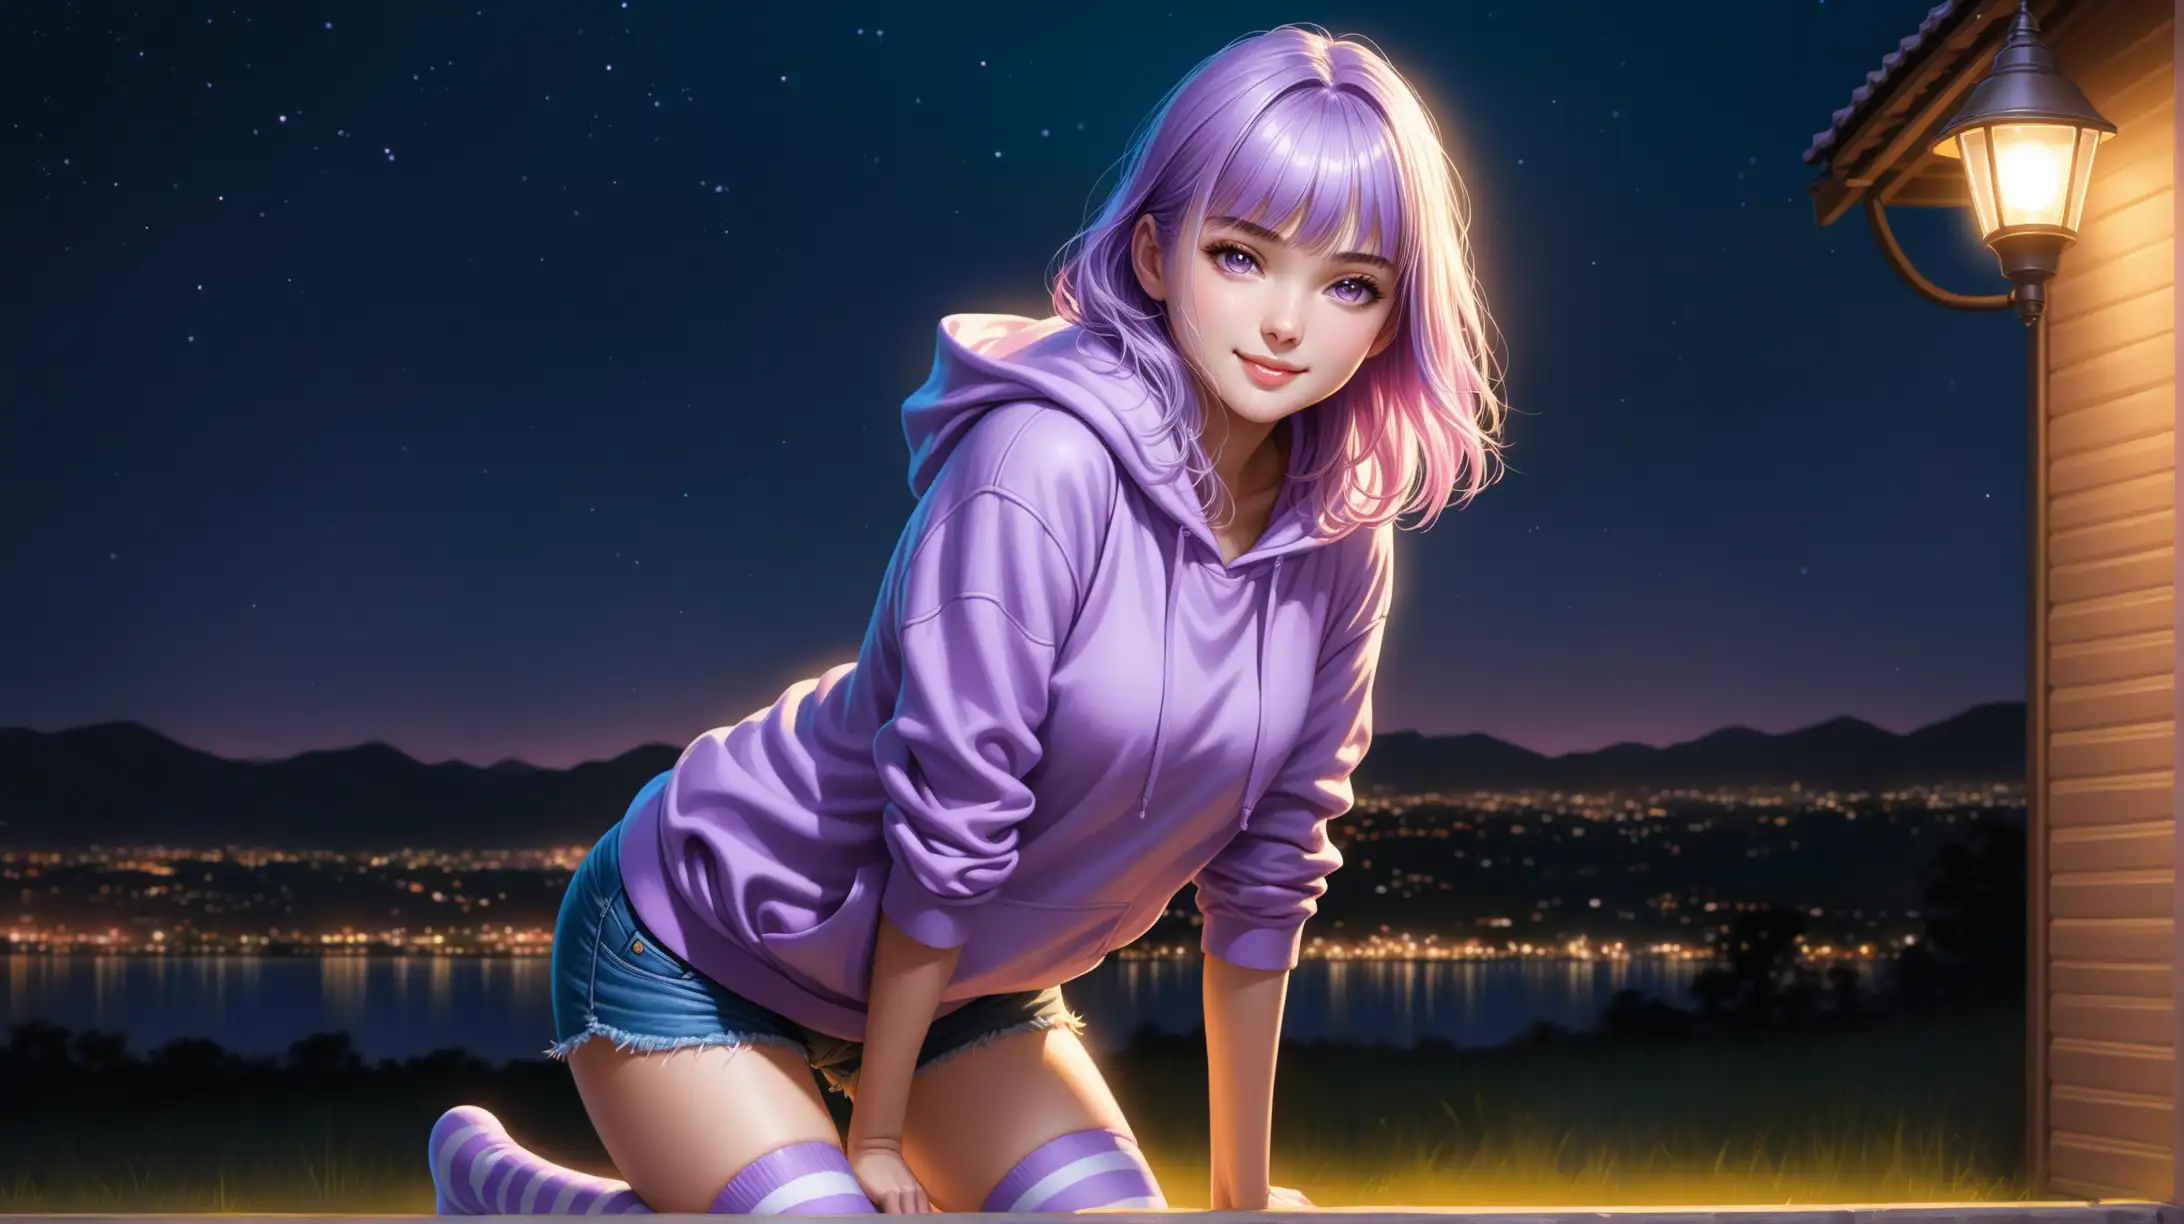 Seductive Woman with Light Purple Hair and Hoodie Outdoors at Night